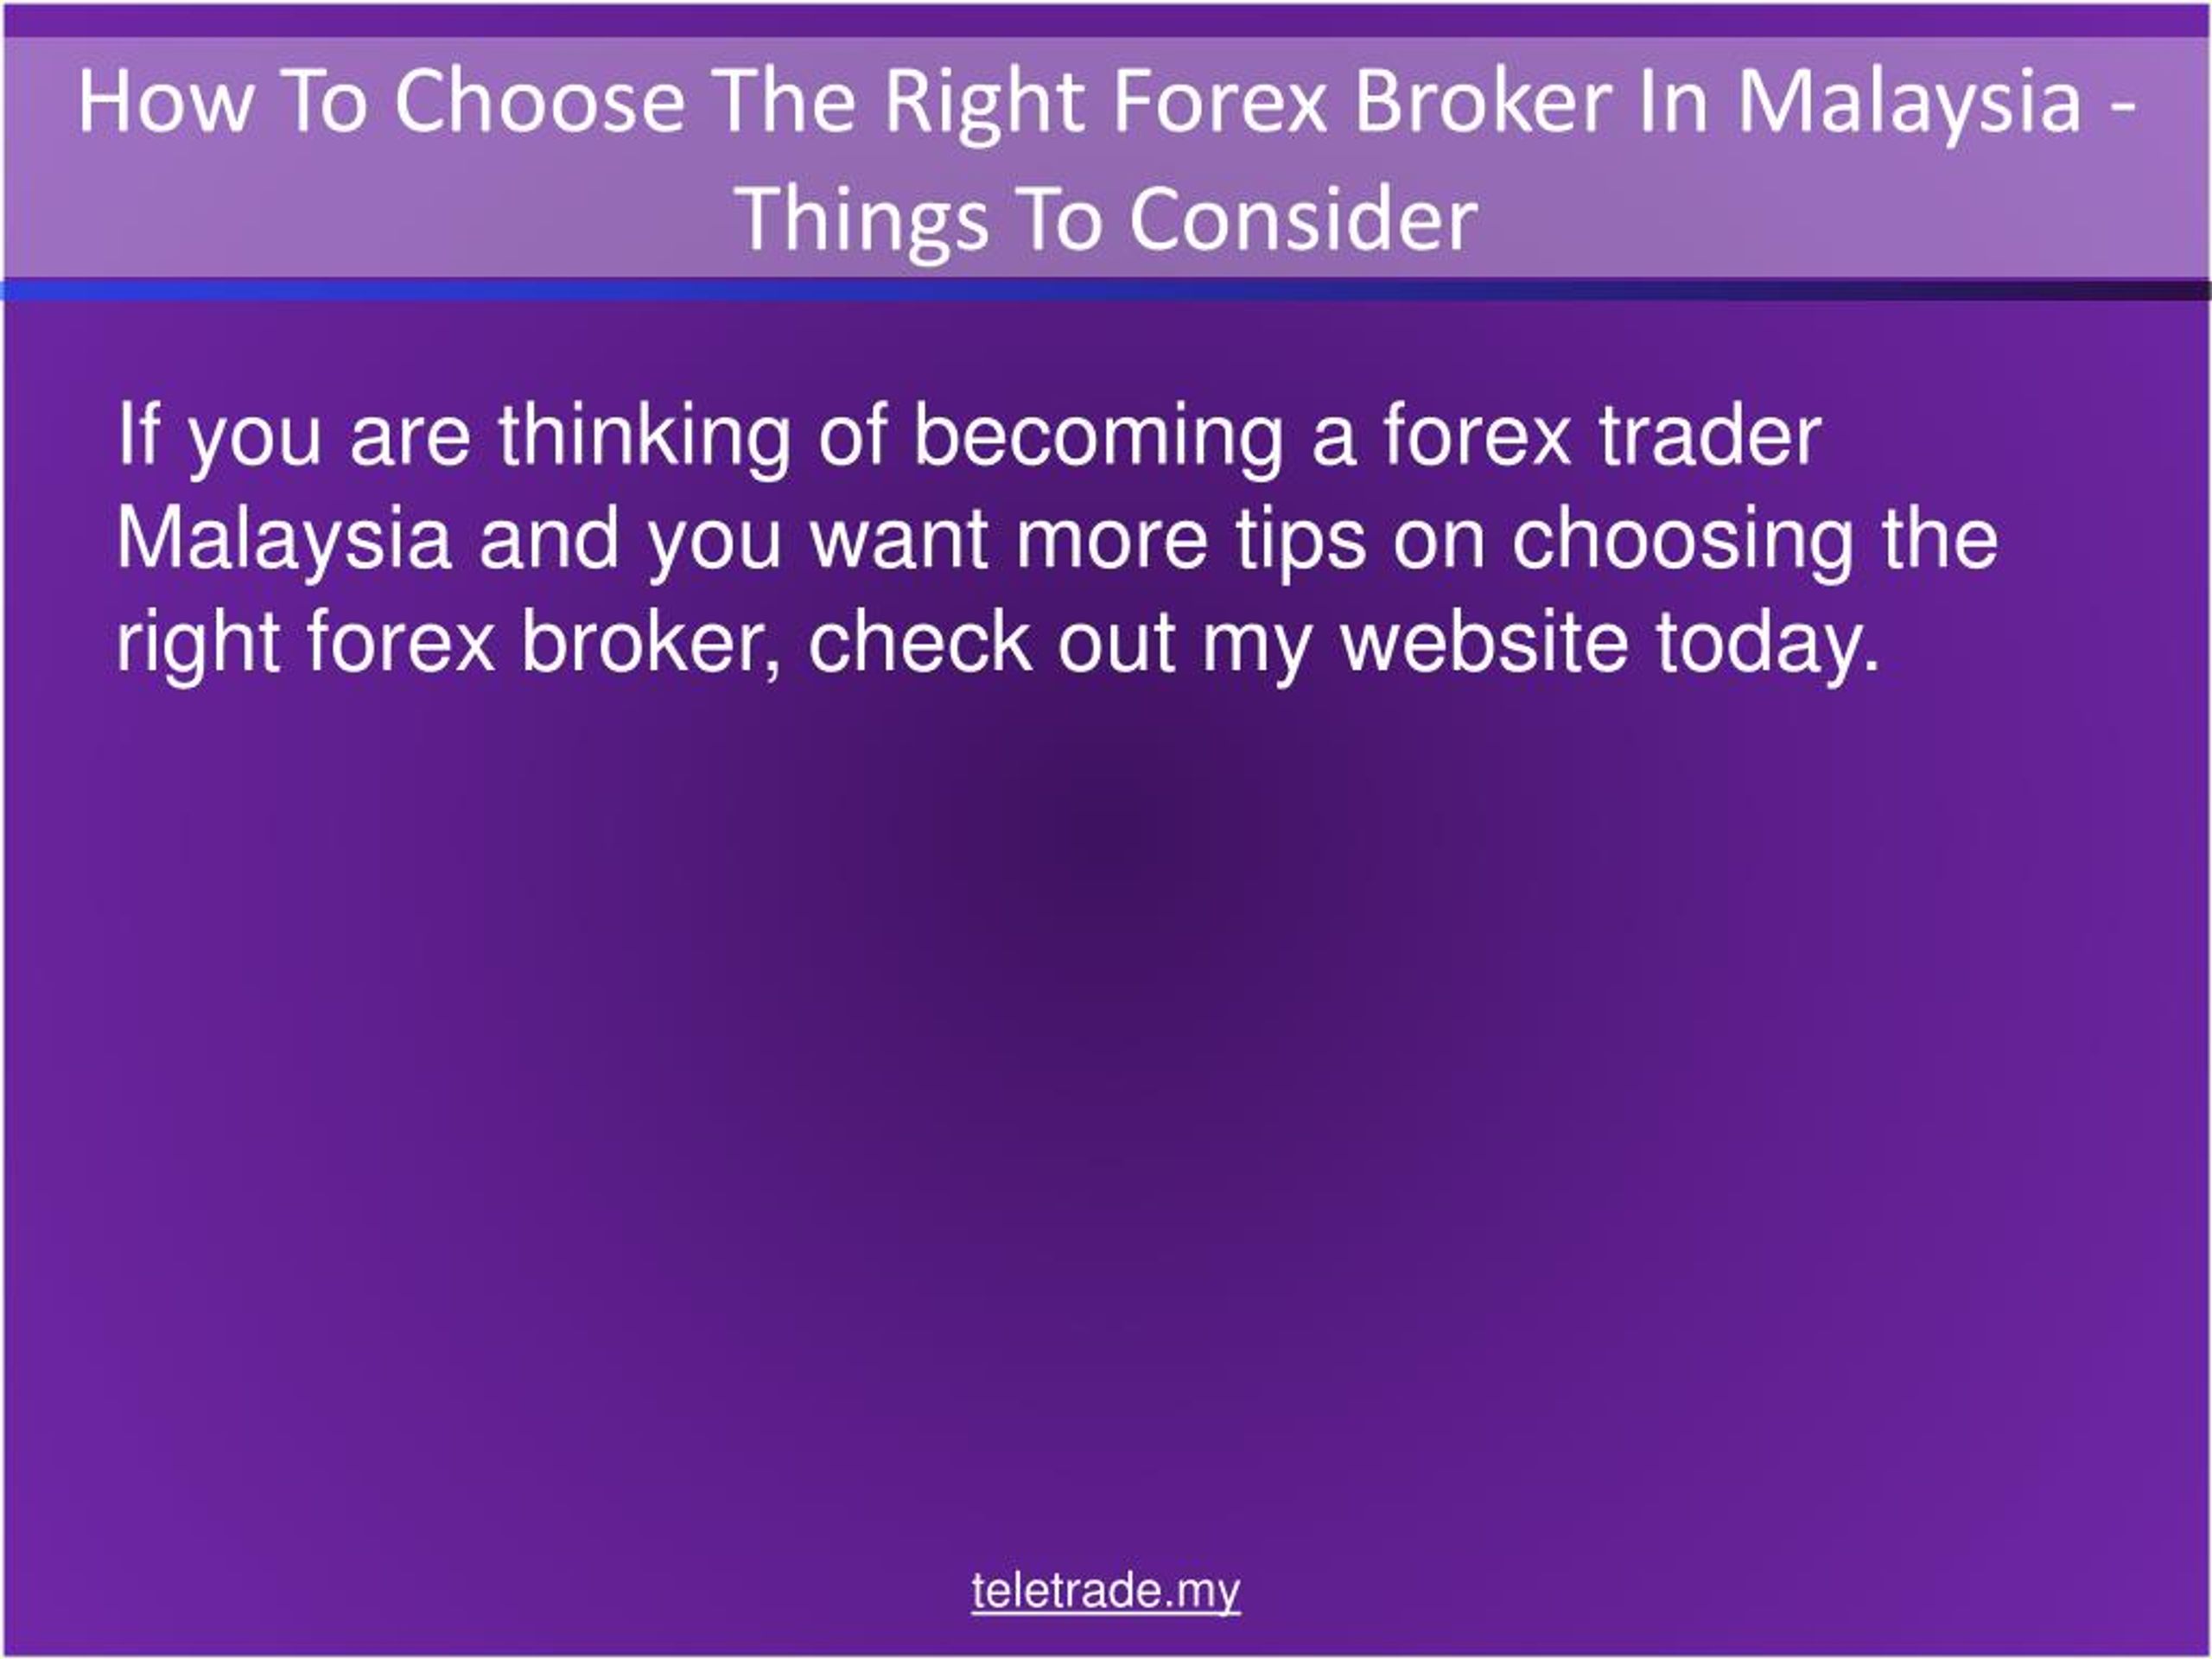 Ppt How To Choose The Right Forex Broker In Malaysia Things To - 